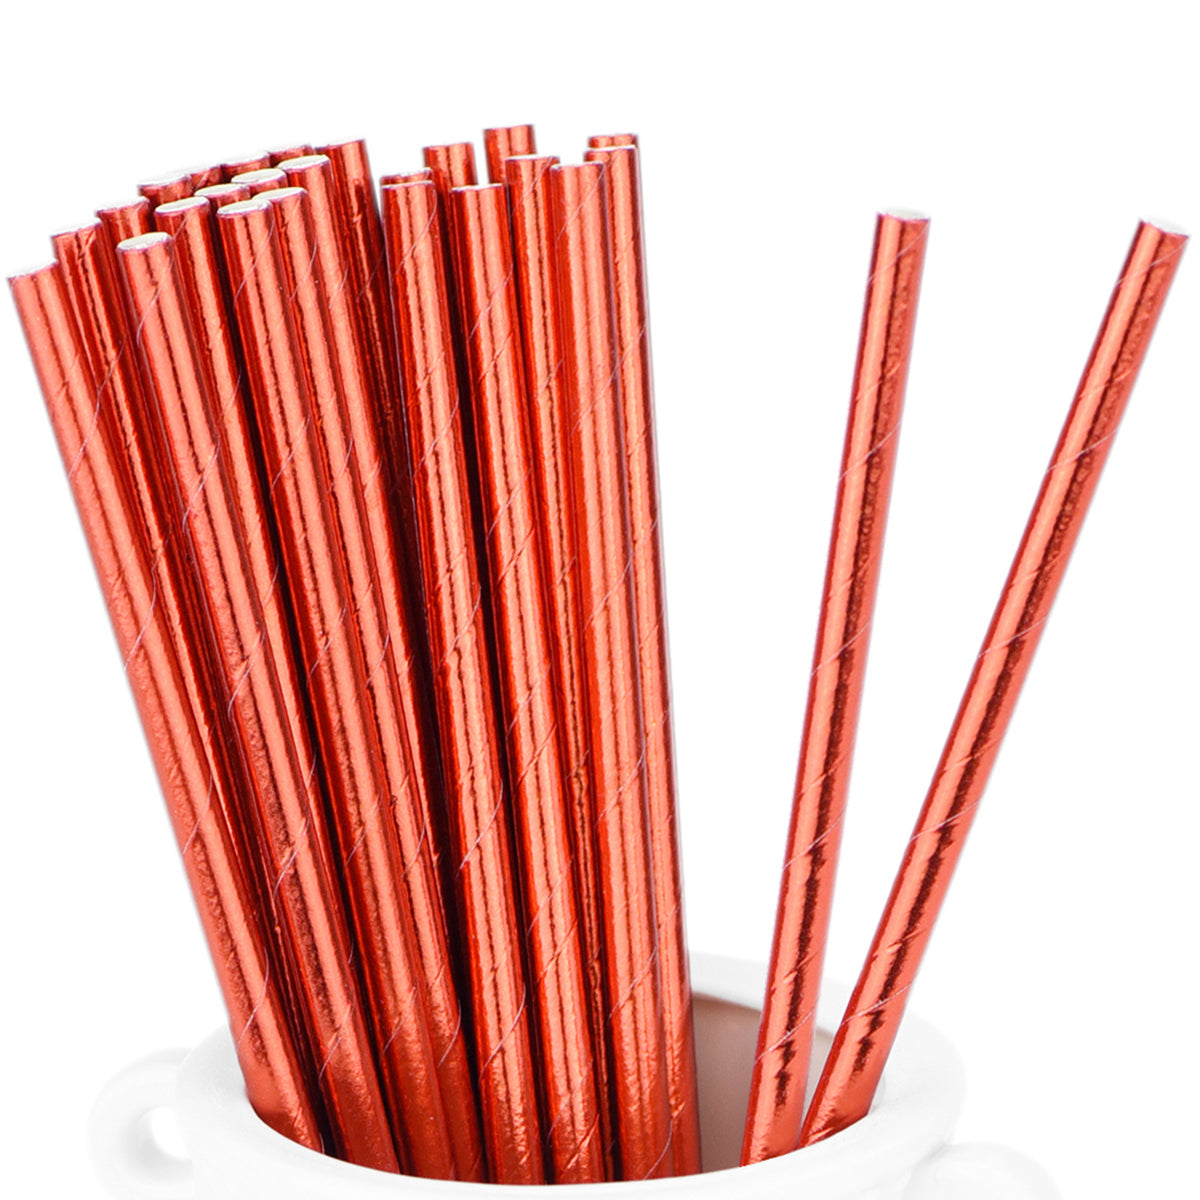 Red Hearts Paper Straw - Roc Paper Straws